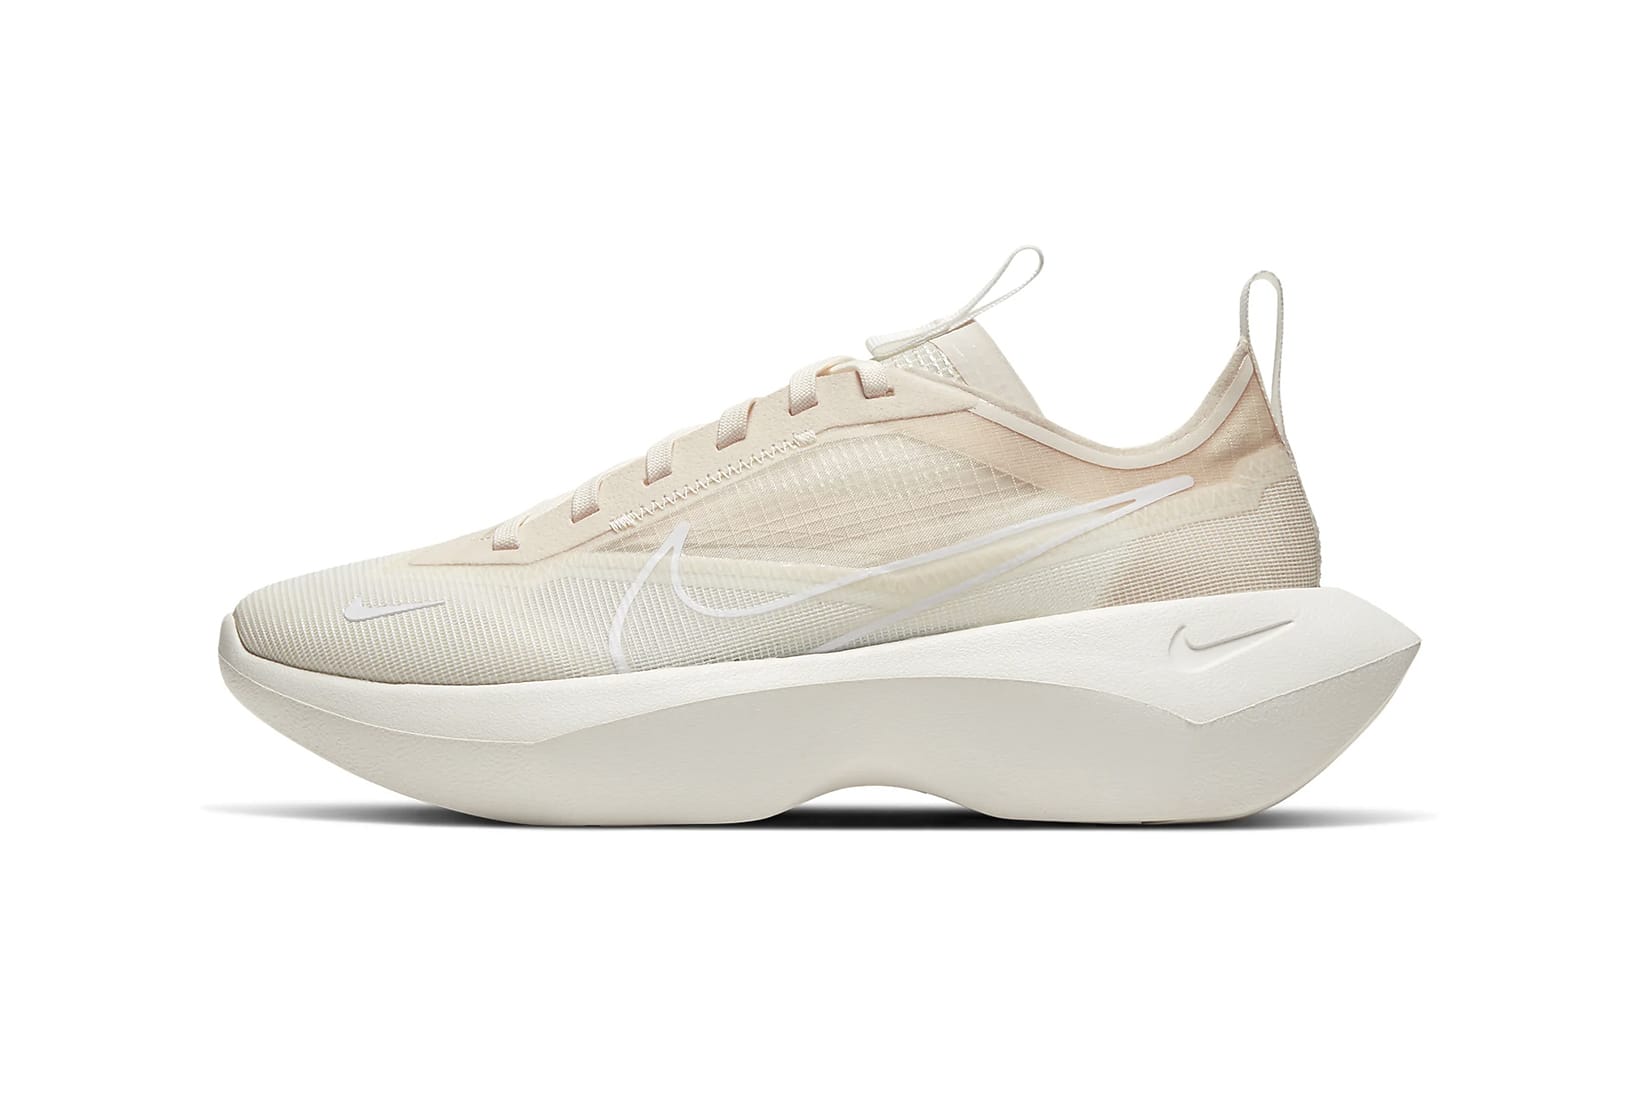 nike shoes cream color